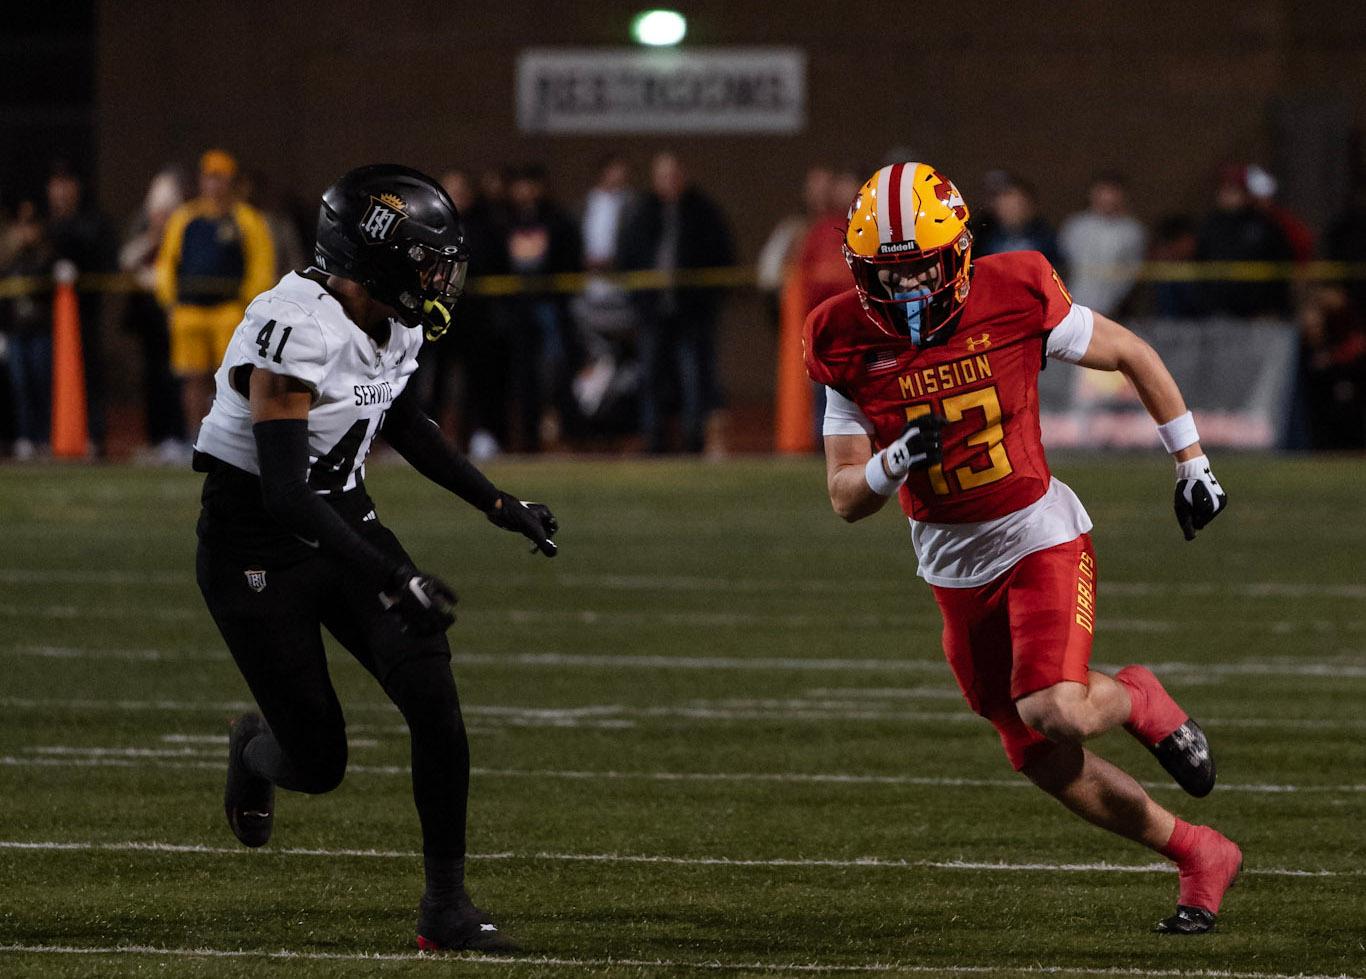 On Heels of State Championship, Mission Viejo Set up for More Football Success